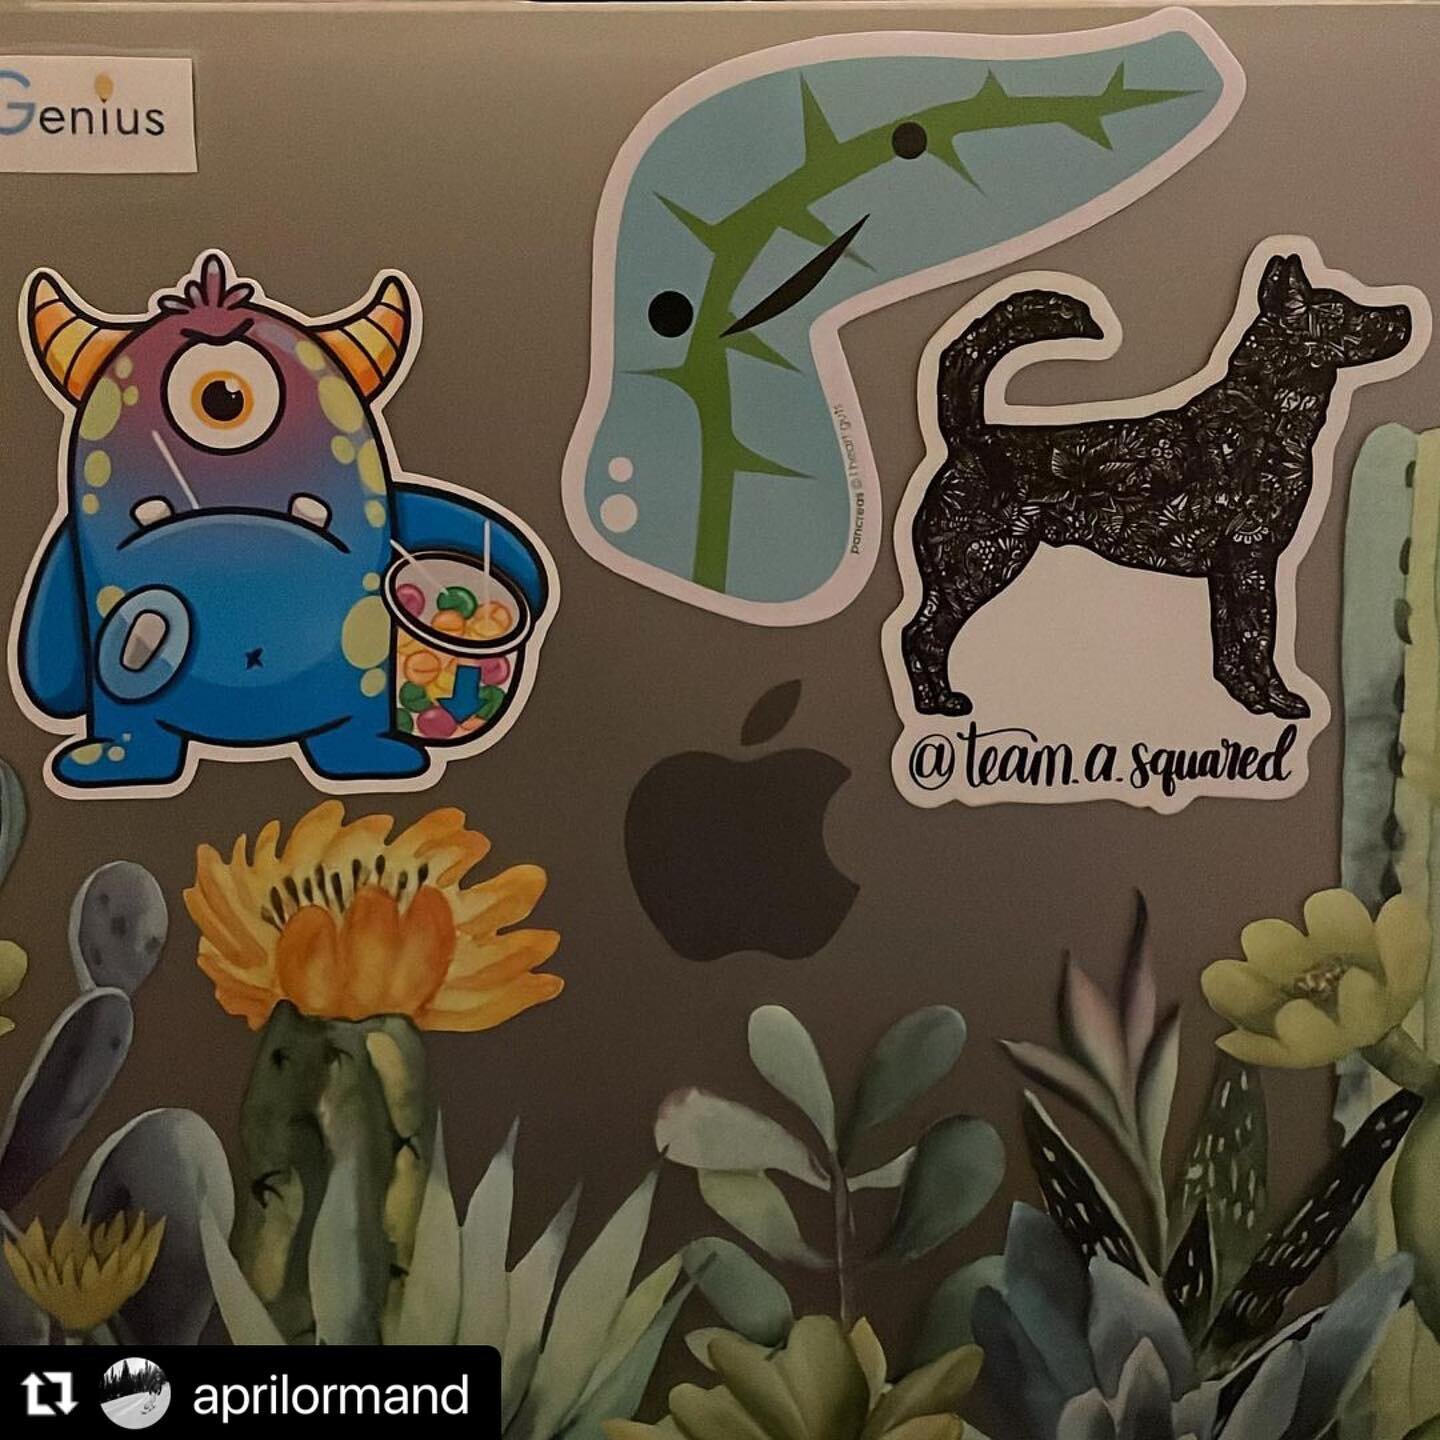 #Repost @aprilormand with @make_repost
・・・
Newest sticker addition to the MacBook is the @mytype_1 candy monster who has a Dexcom.

I think it looks pretty good beside my @iheartguts pancreas (someone got me a new one since mine has decided to be fau